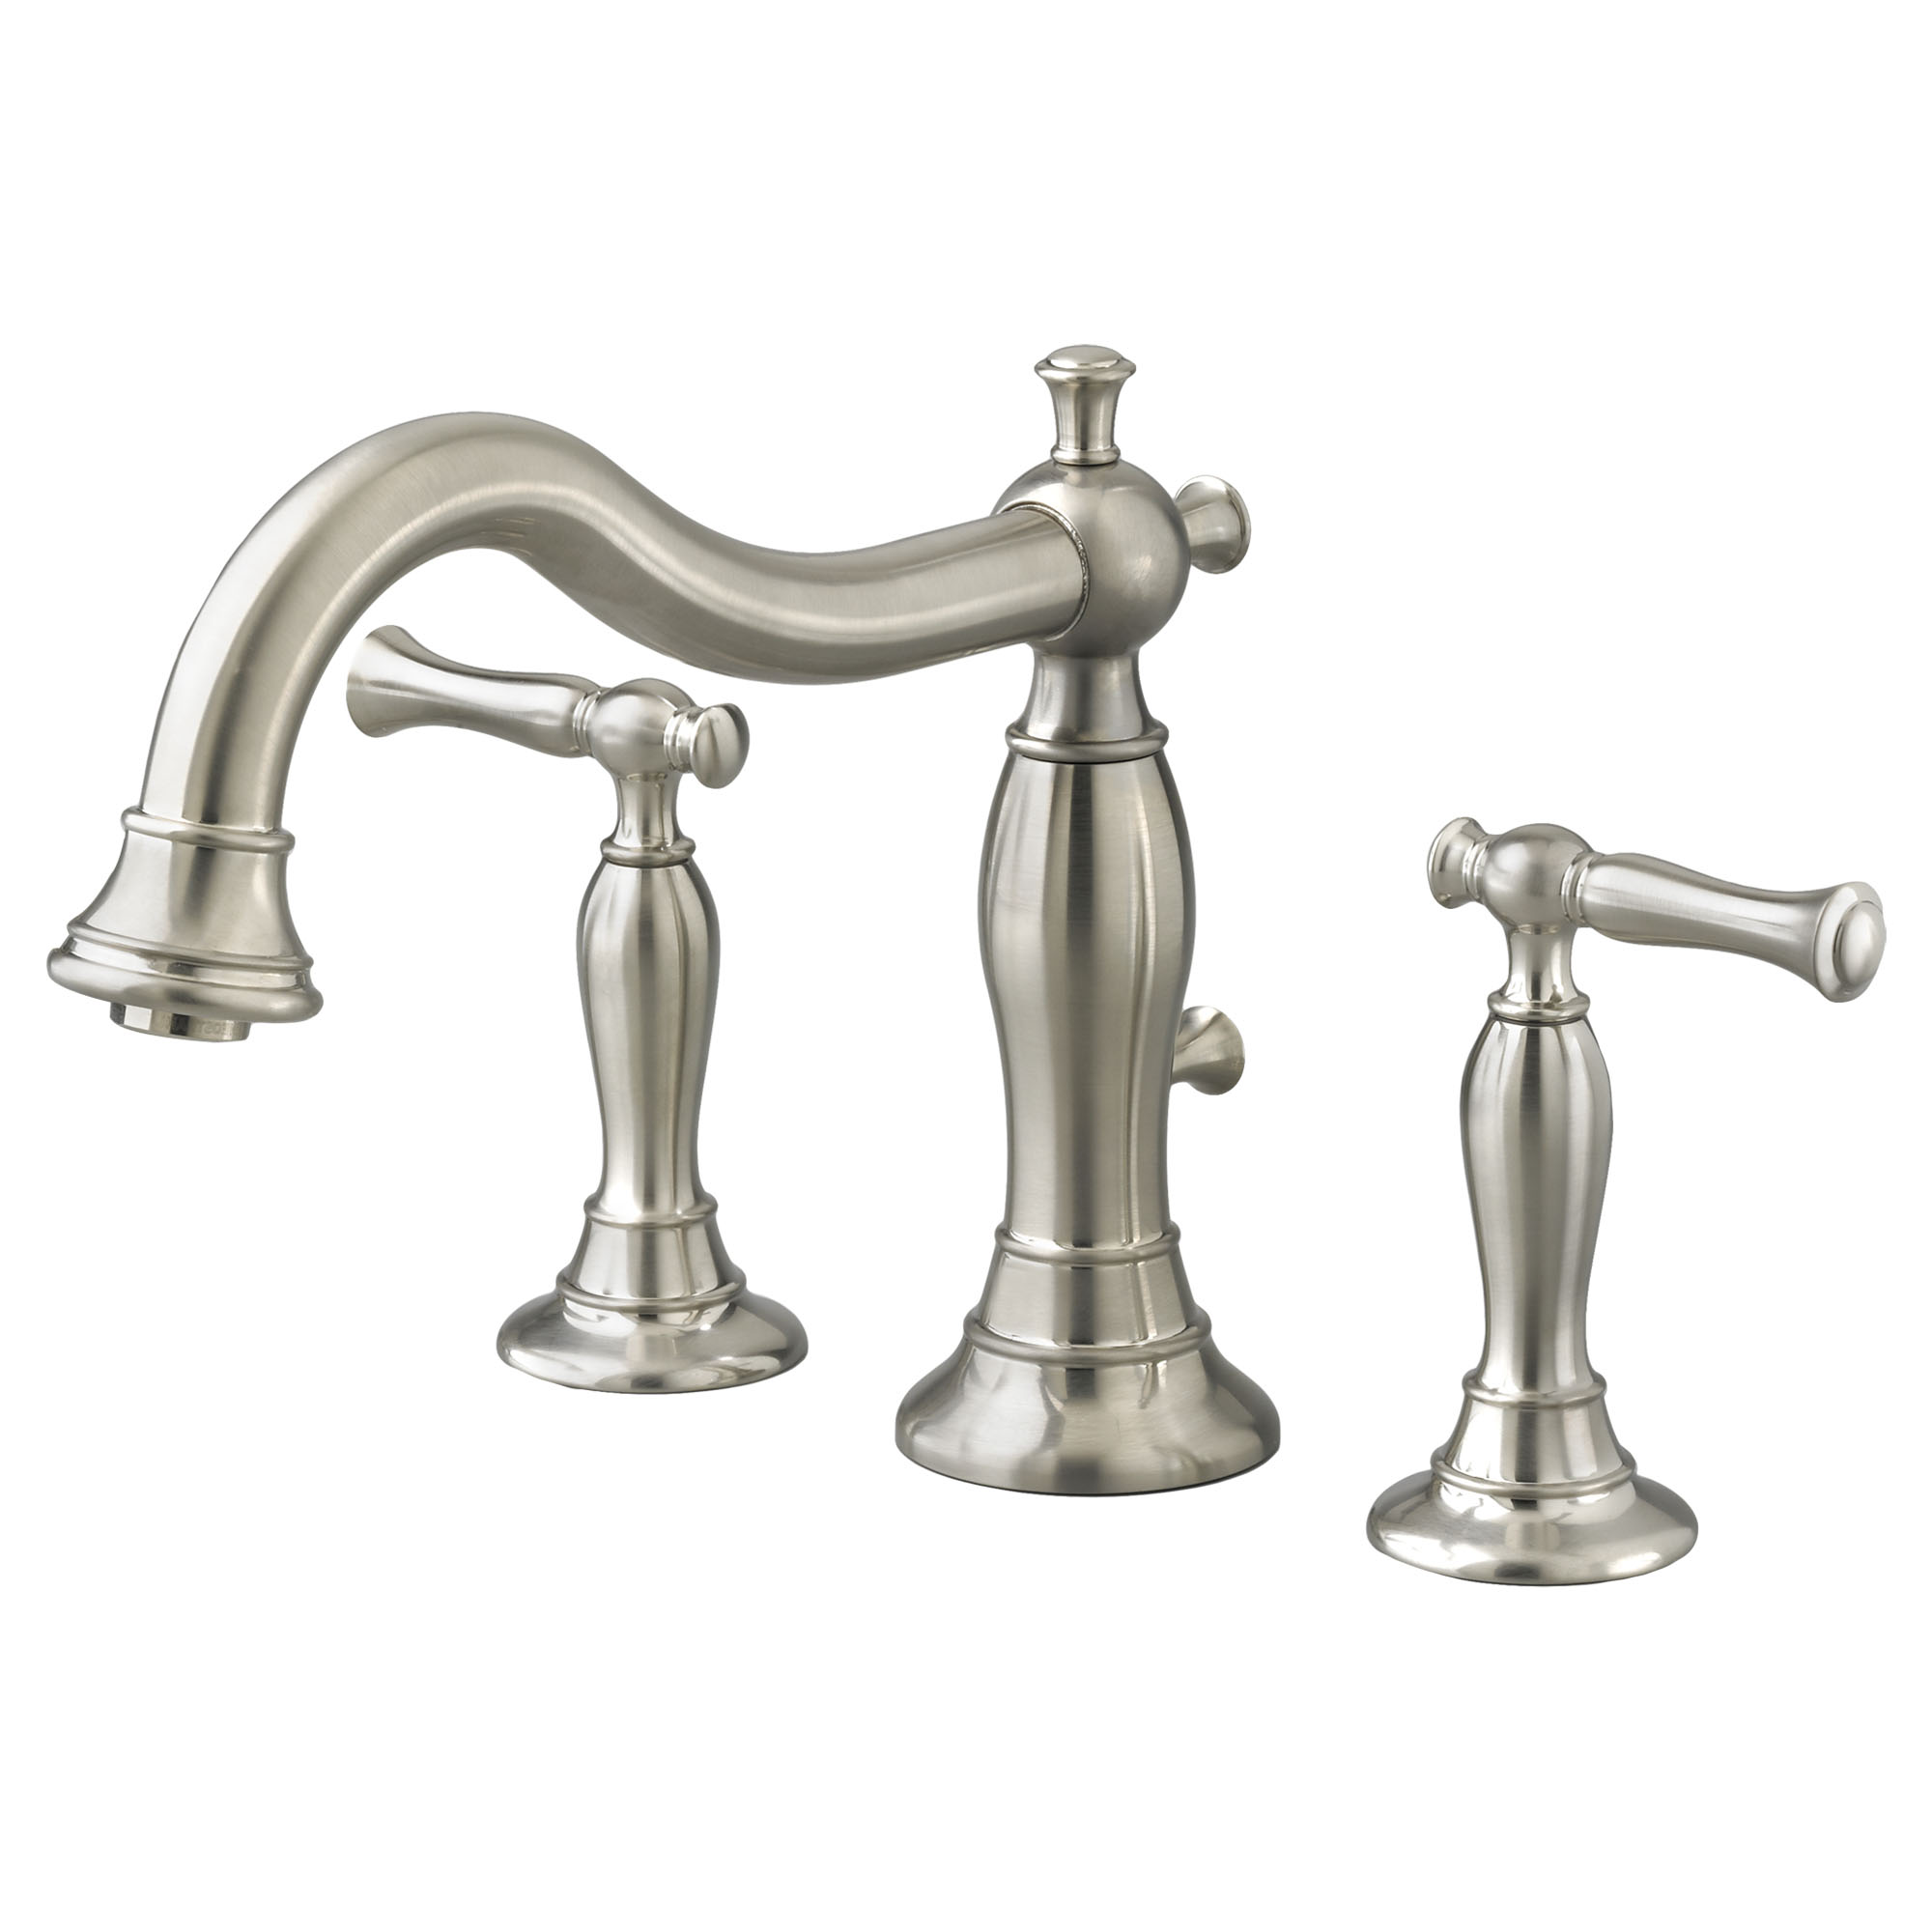 Quentin™ Bathtub Faucet With Lever Handles for Flash™ Rough-In Valve